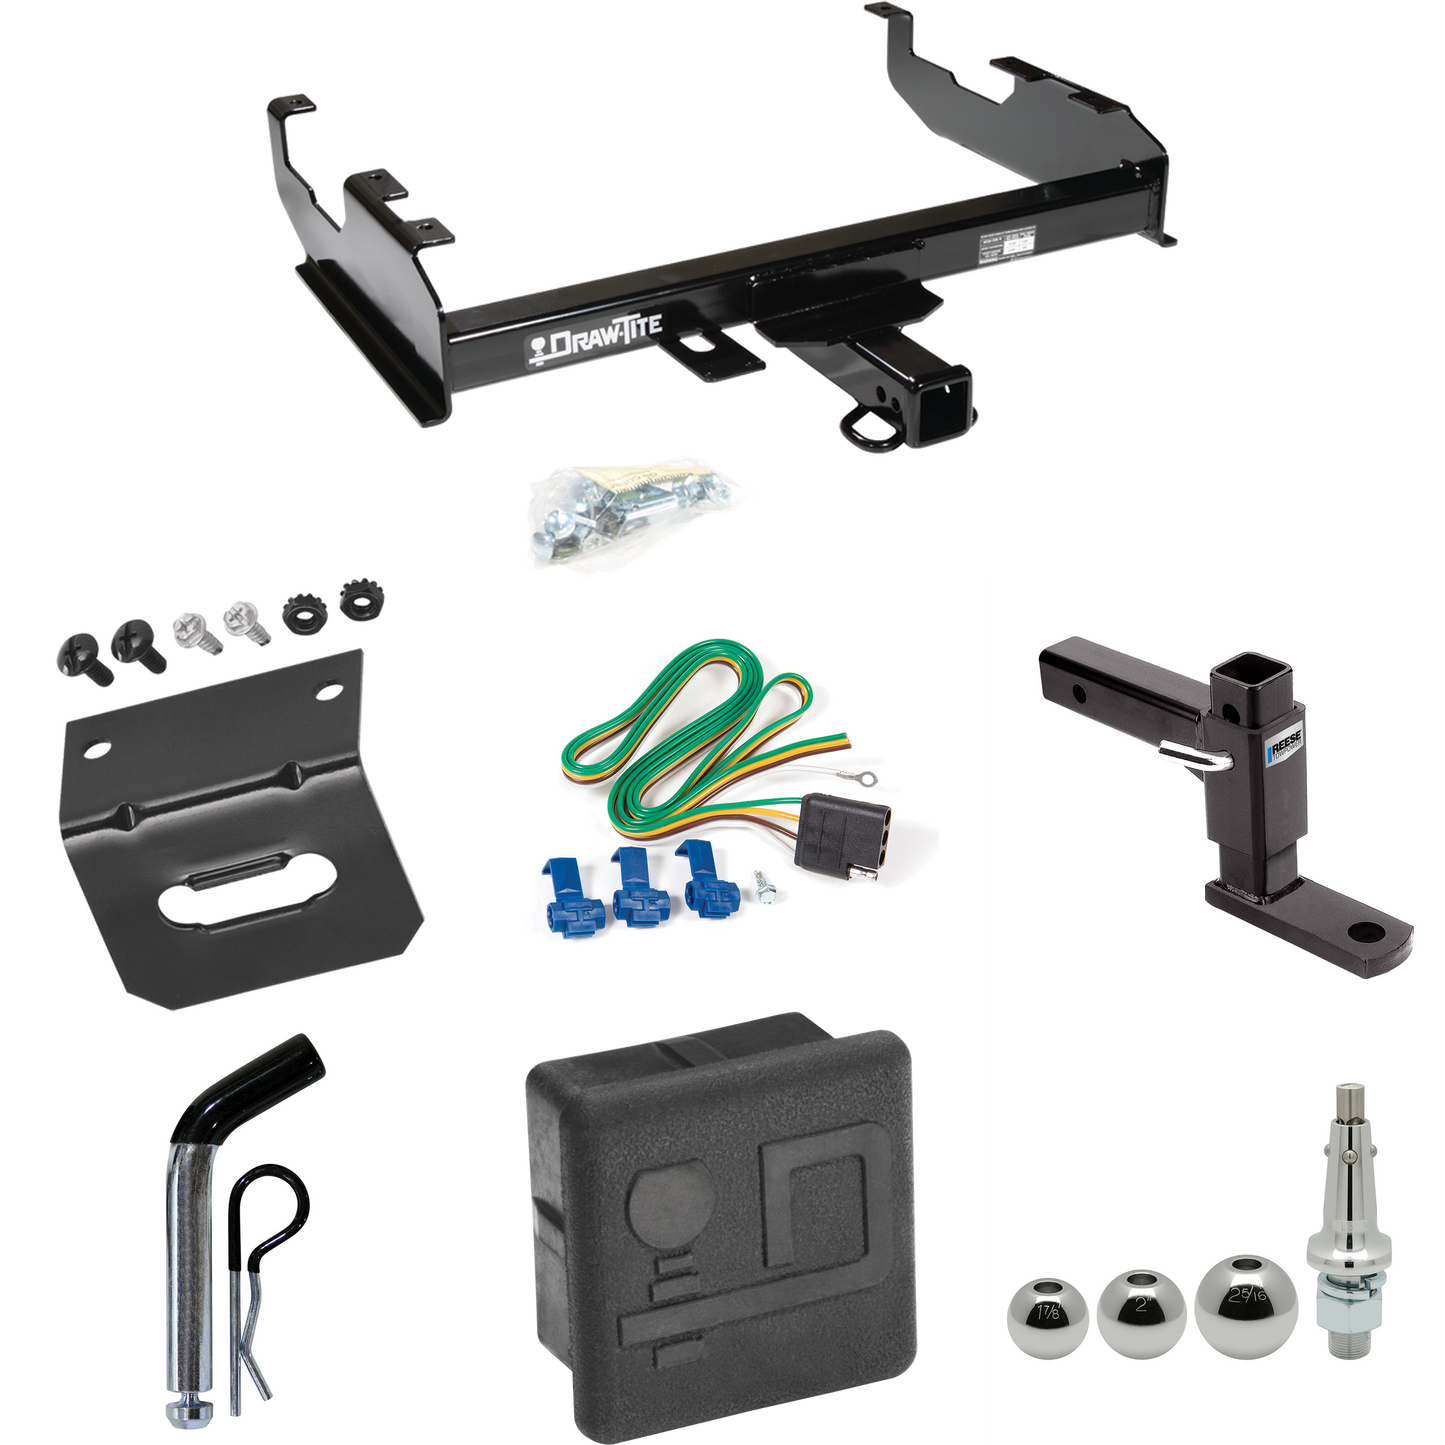 Fits 1963-1972 Chevrolet C30 Trailer Hitch Tow PKG w/ 4-Flat Wiring + Adjustable Drop Rise Ball Mount + Pin/Clip + Inerchangeable 1-7/8" & 2" & 2-5/16" Balls + Wiring Bracket + Hitch Cover (For w/8' Bed Models) By Draw-Tite